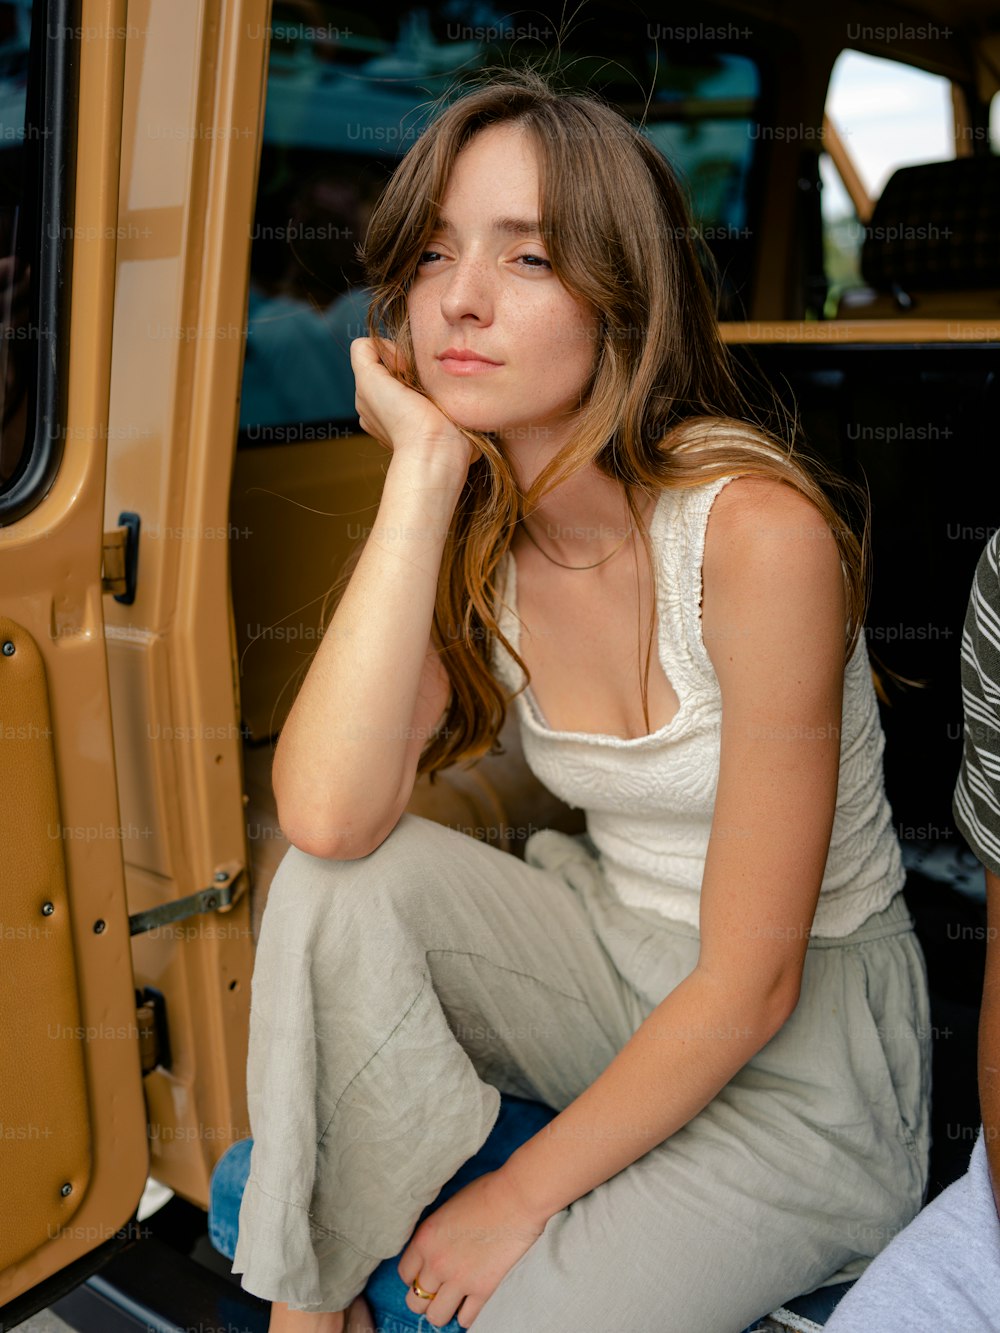 a woman sitting in the back of a vehicle